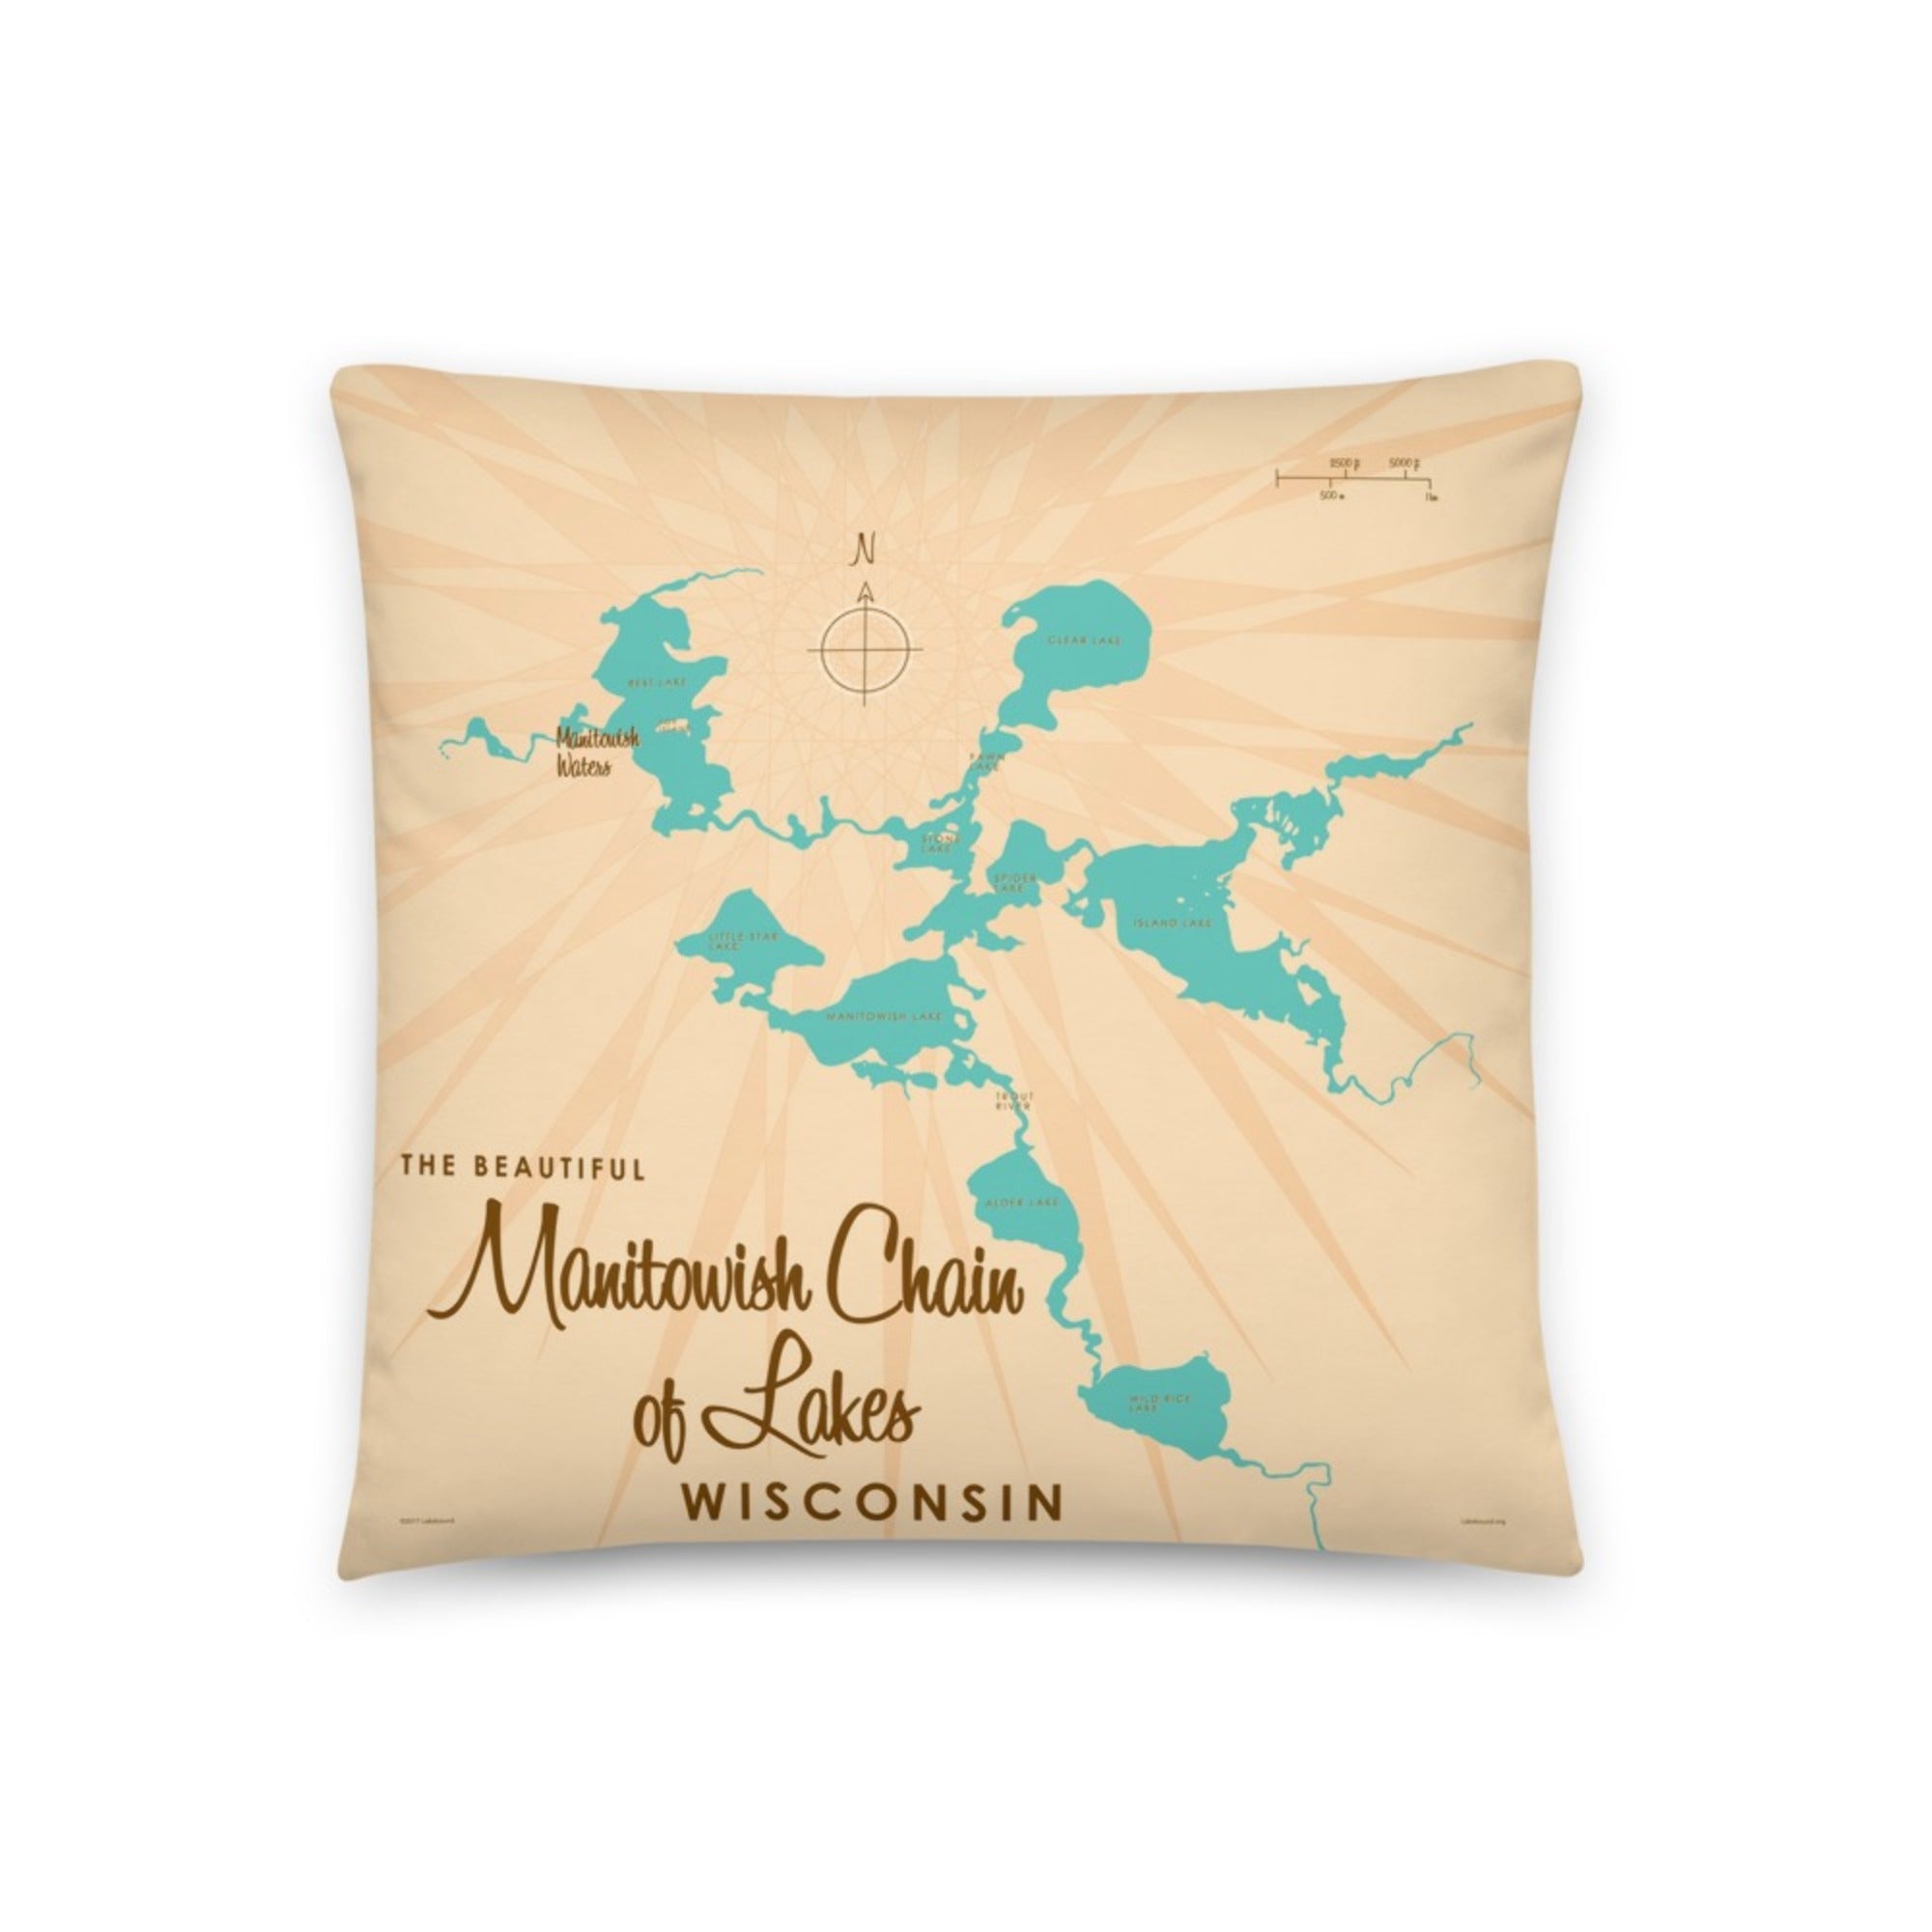 Manitowish Chain of Lakes Wisconsin Pillow